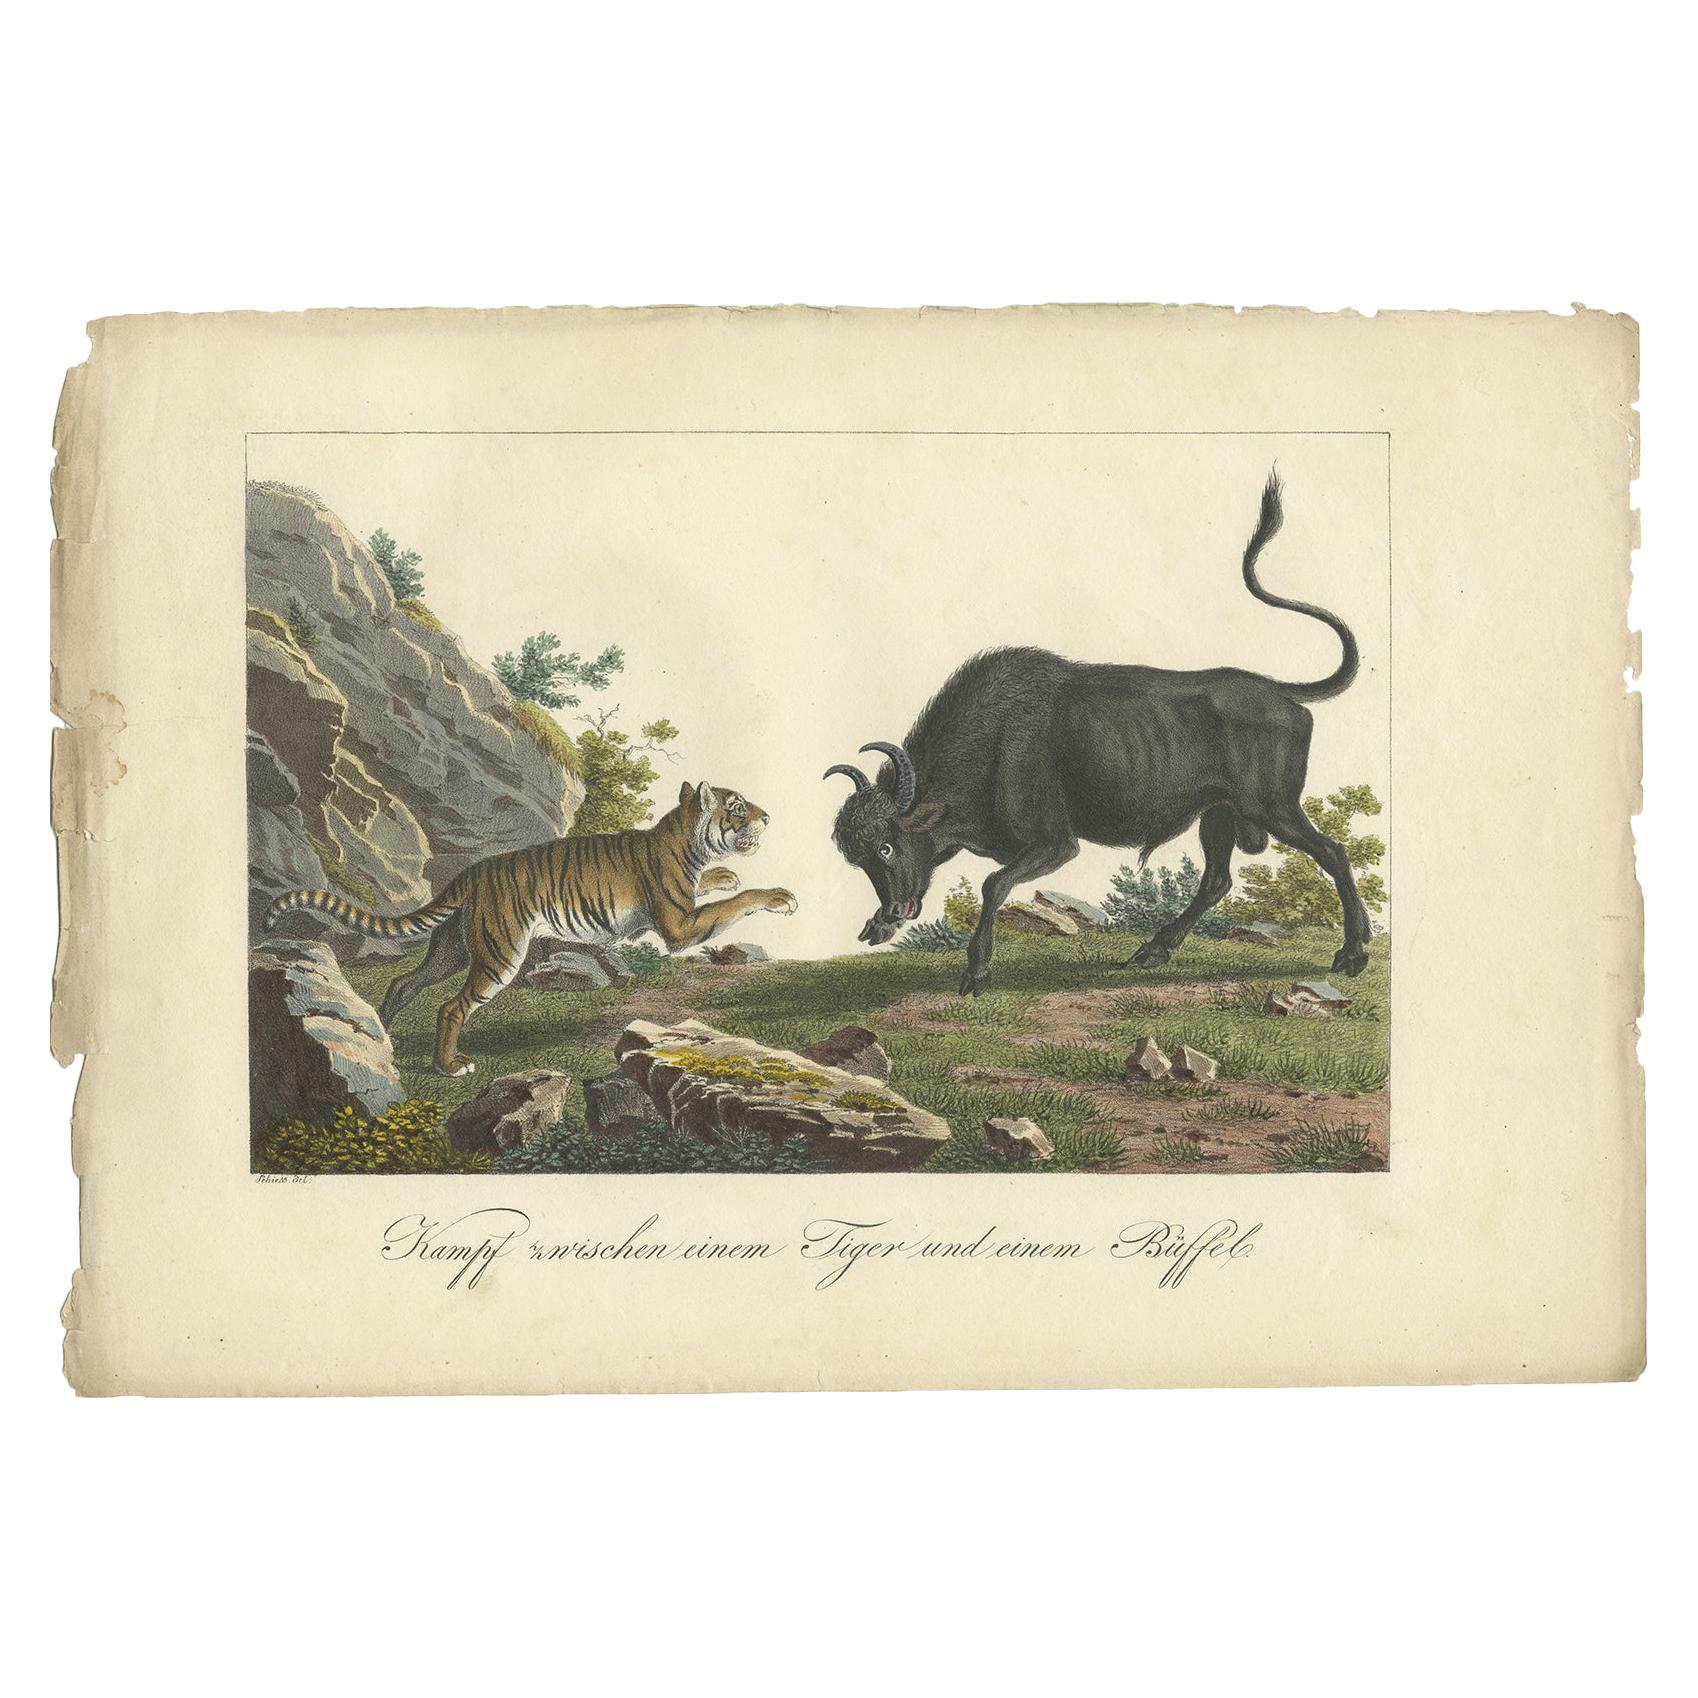 Antique Hand-colored Print of a Fighting Tiger and Buffalo in Indonesia, c.1830 For Sale